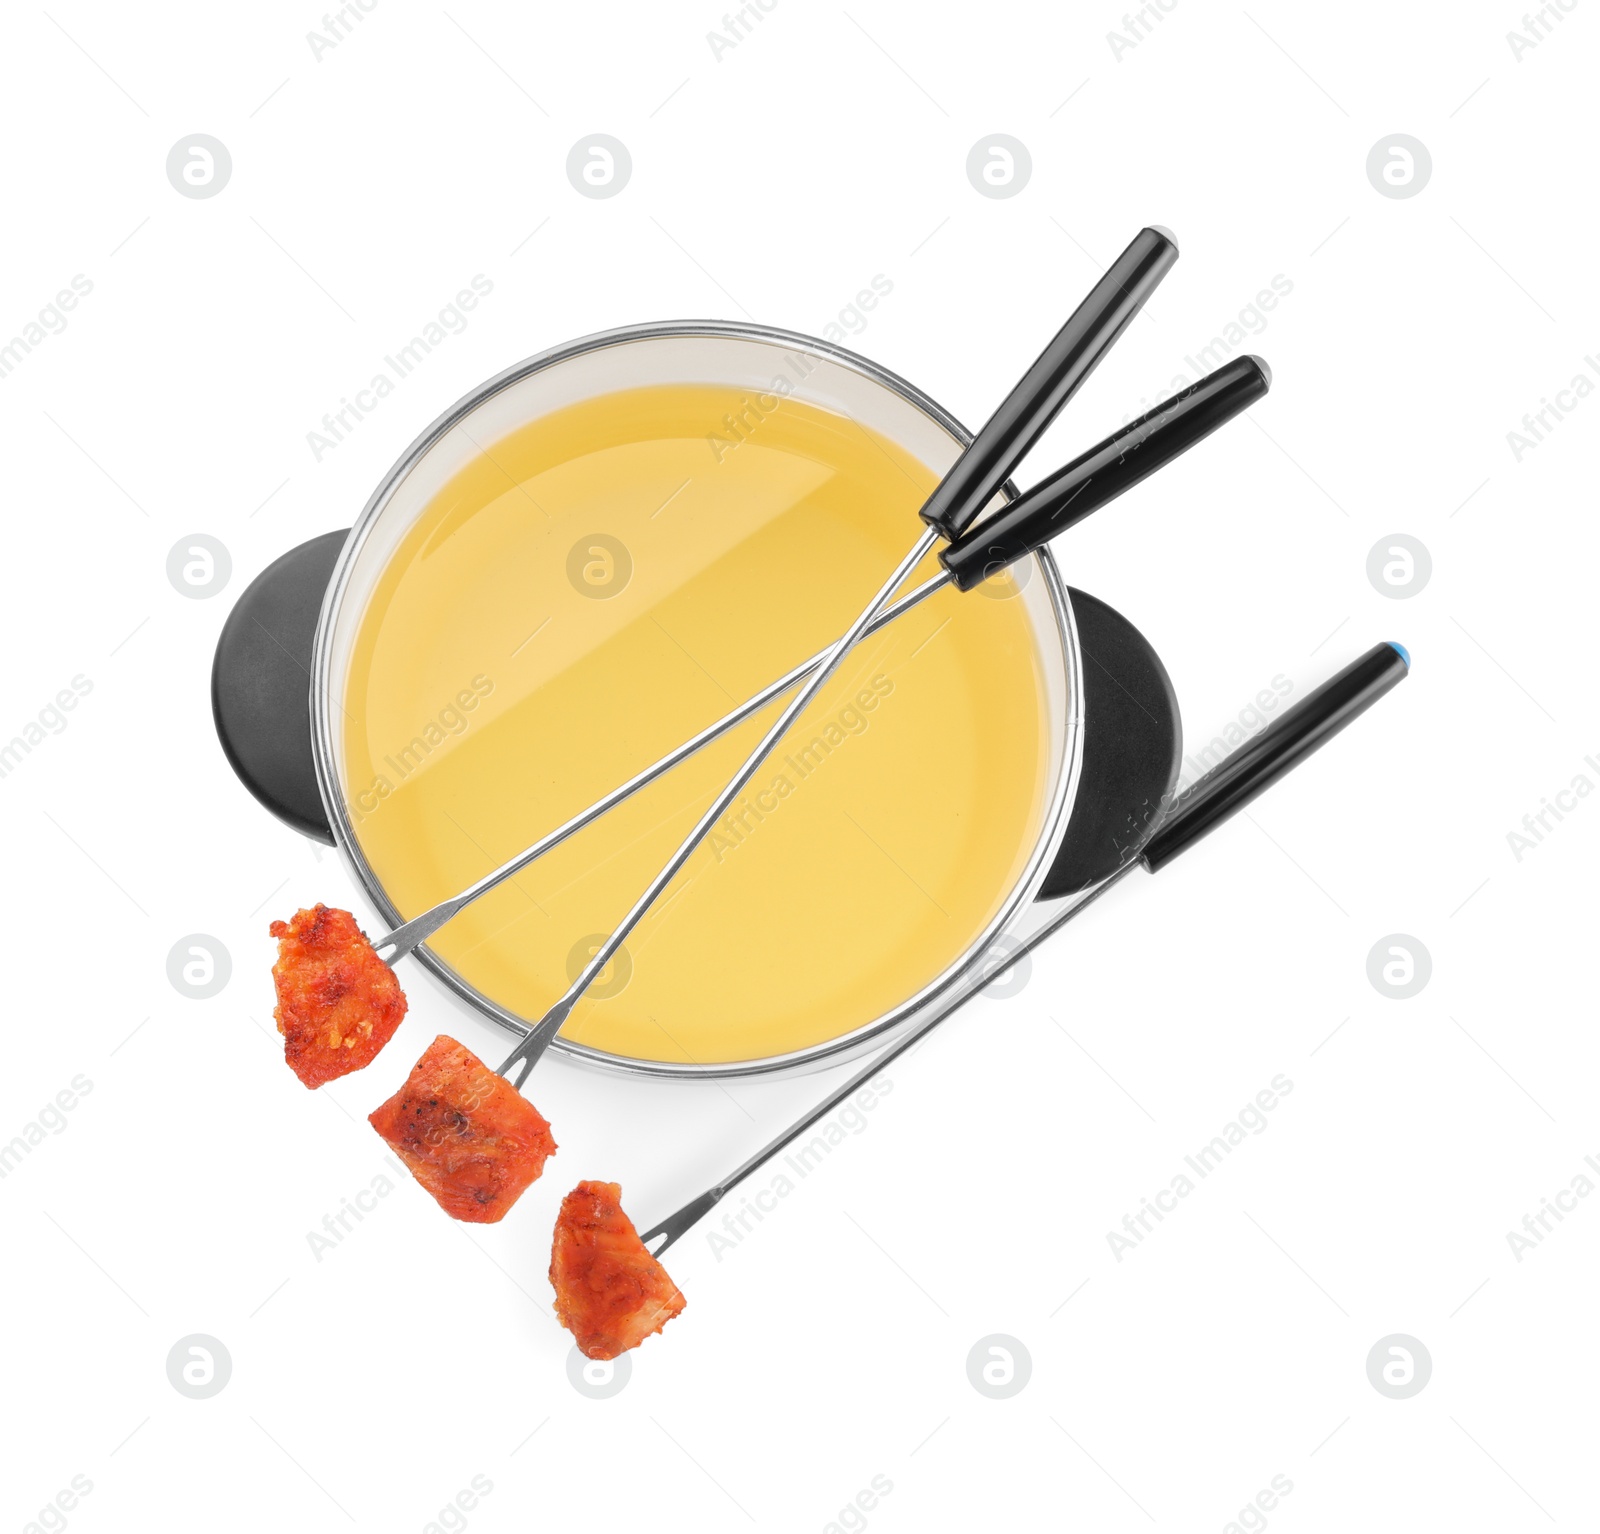 Photo of Oil in fondue pot and forks with fried meat pieces isolated on white, top view